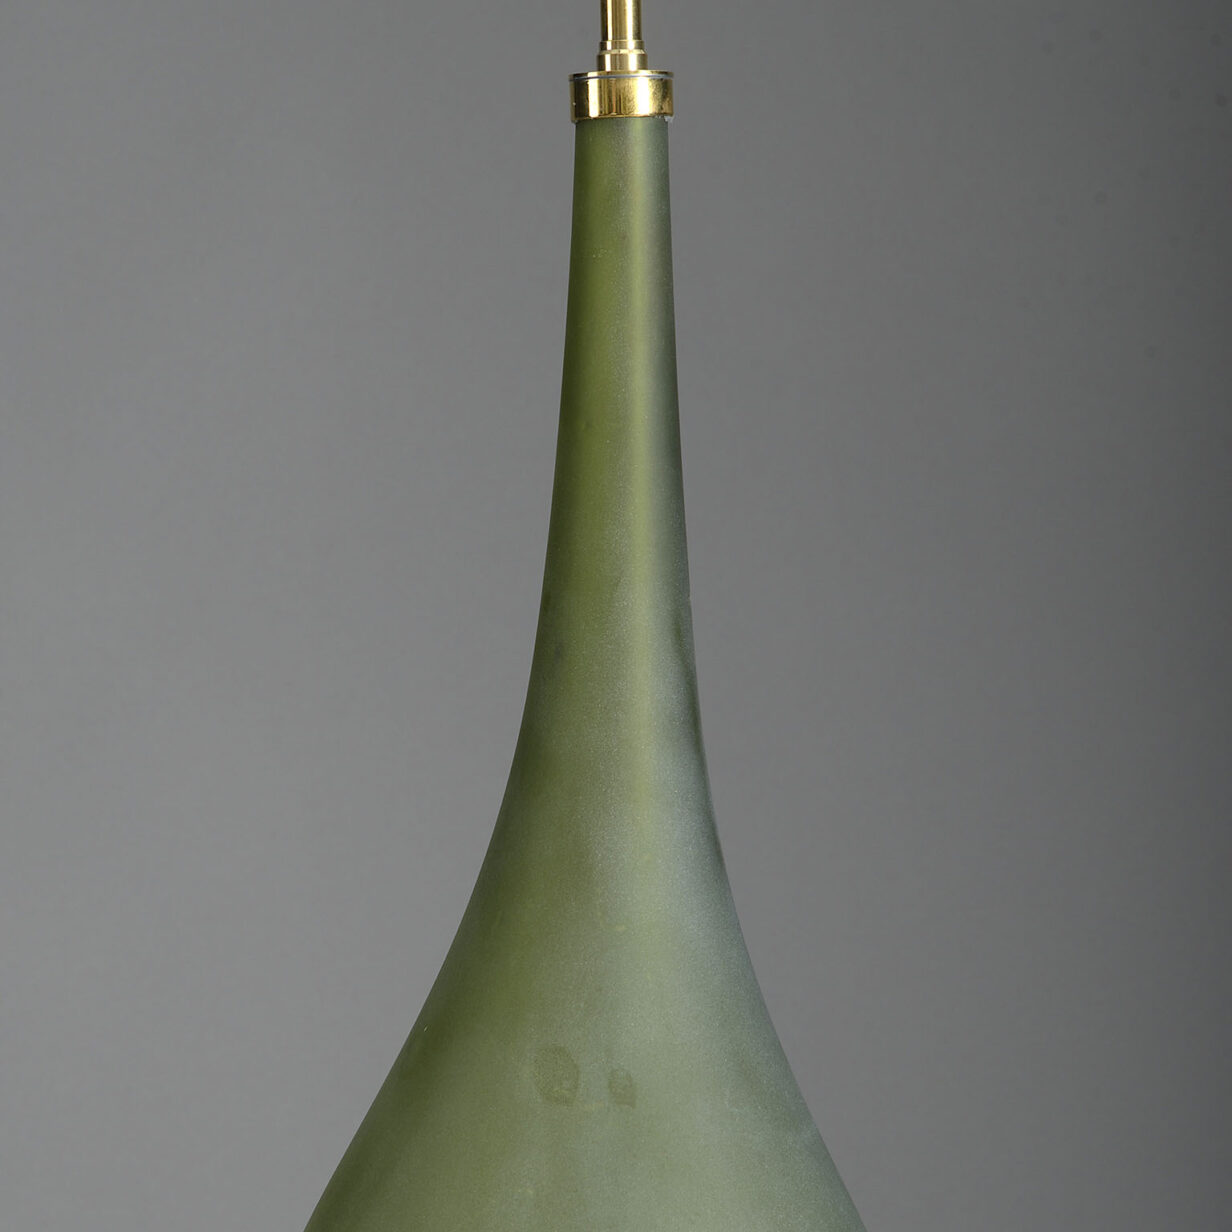 Mid-20th century tall green glass vase pear drop lamp